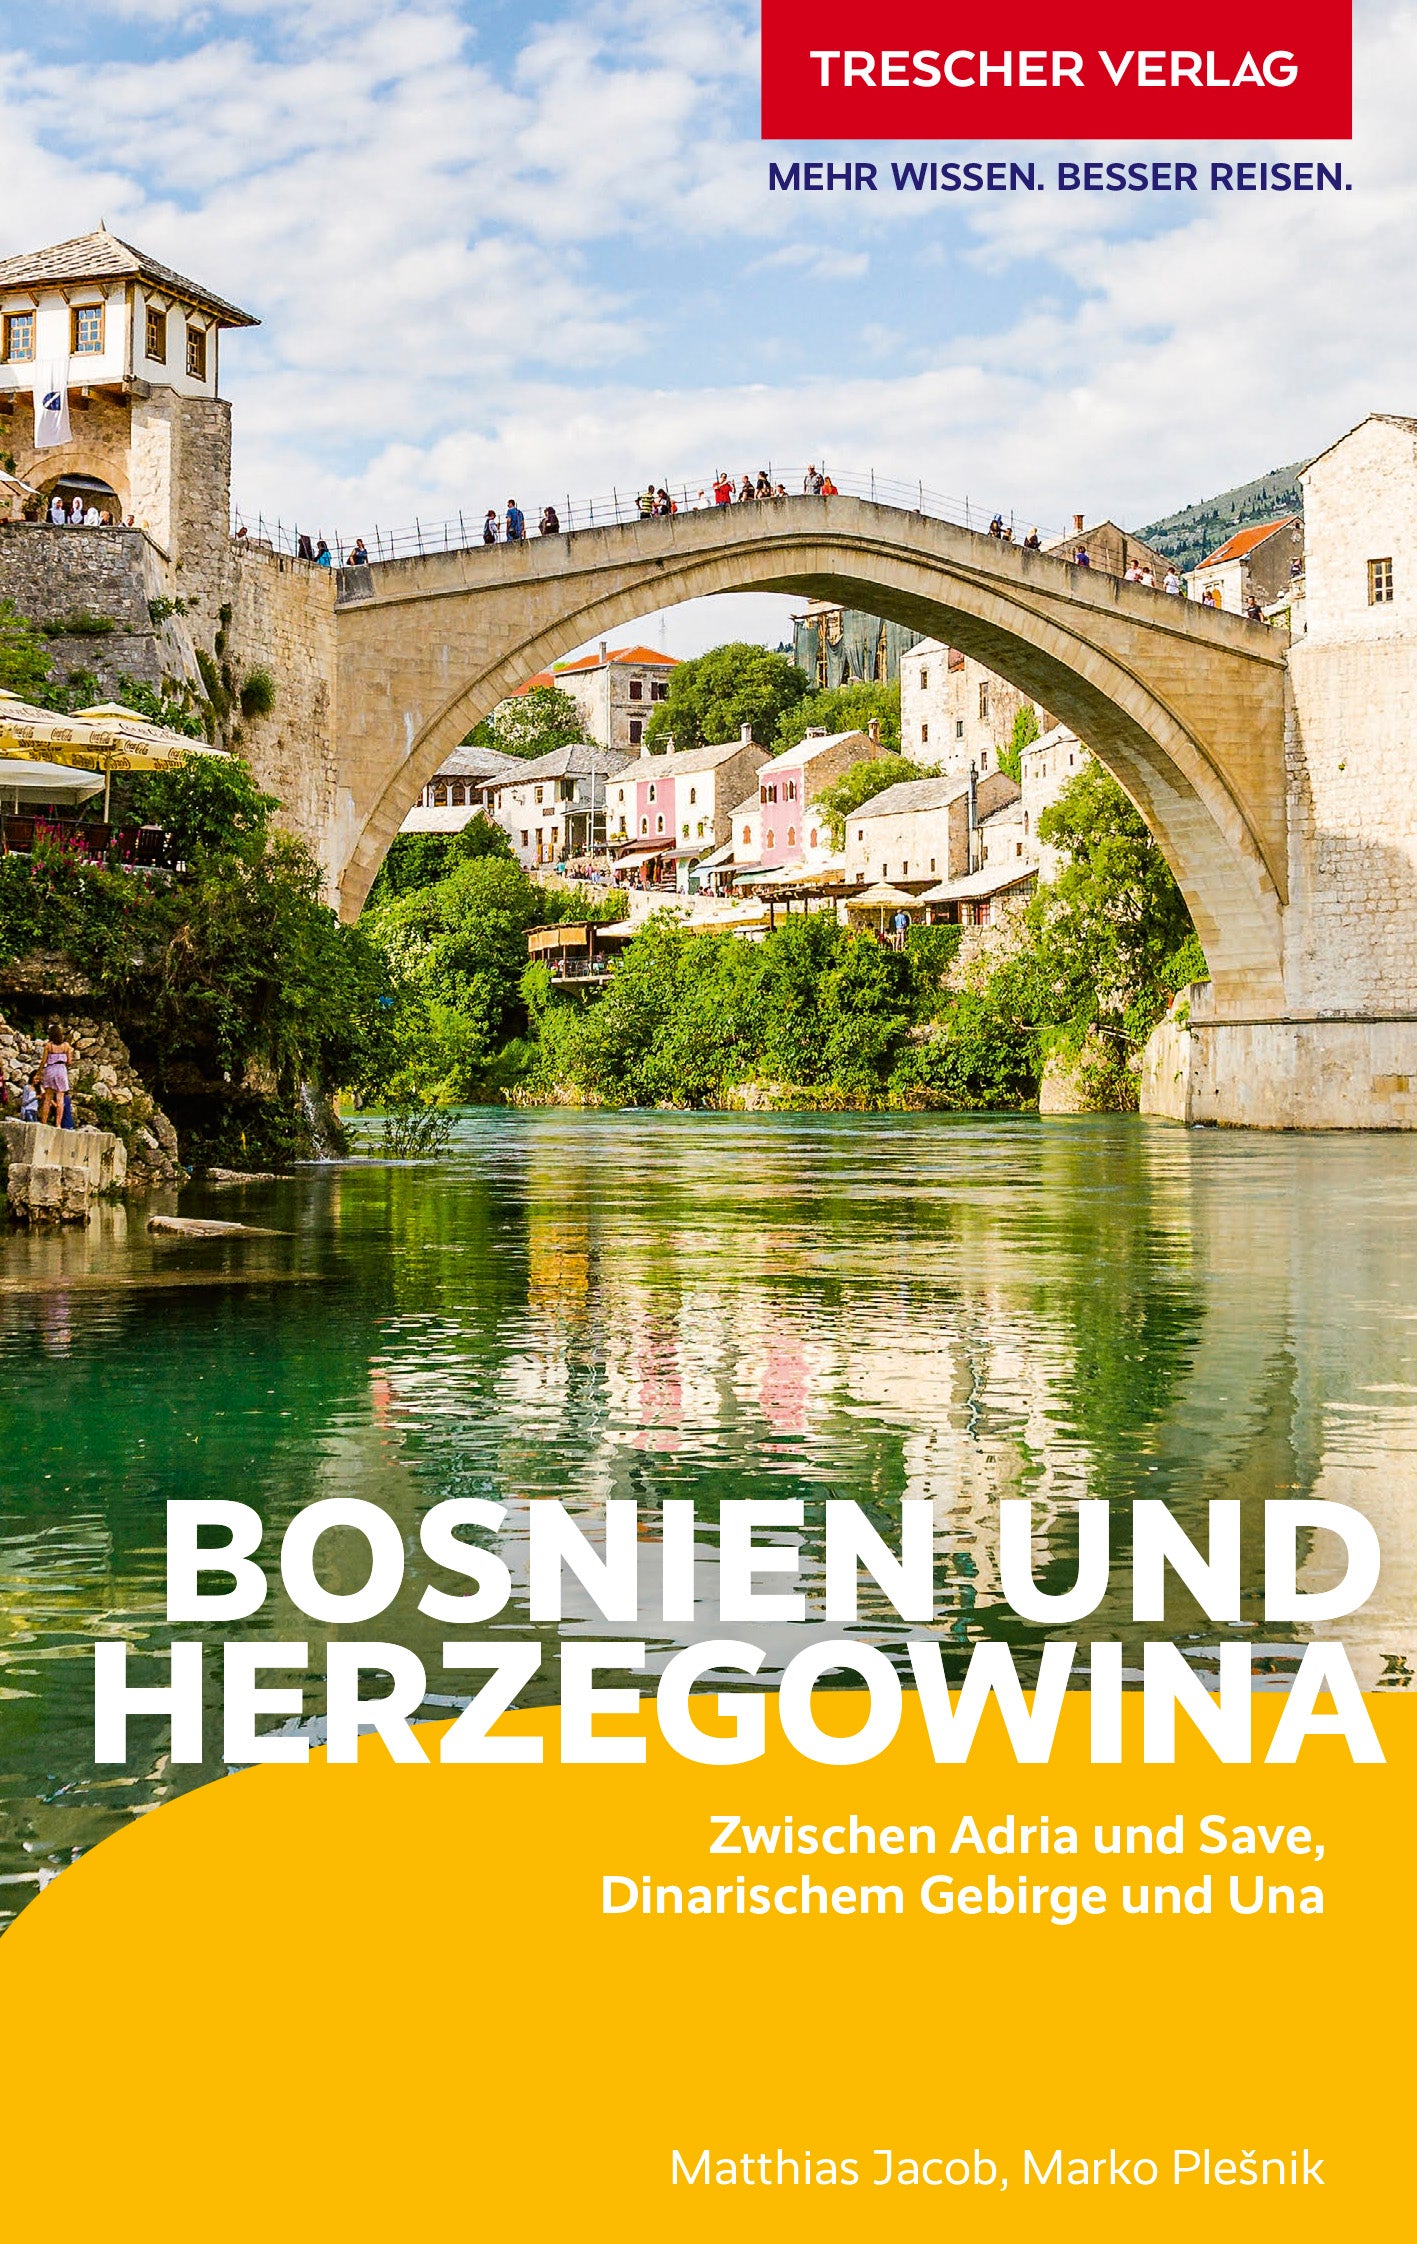 Travel guide Bosnia and Herzegovina - Swiss Travel Guide Save and Adria 7.A 2019